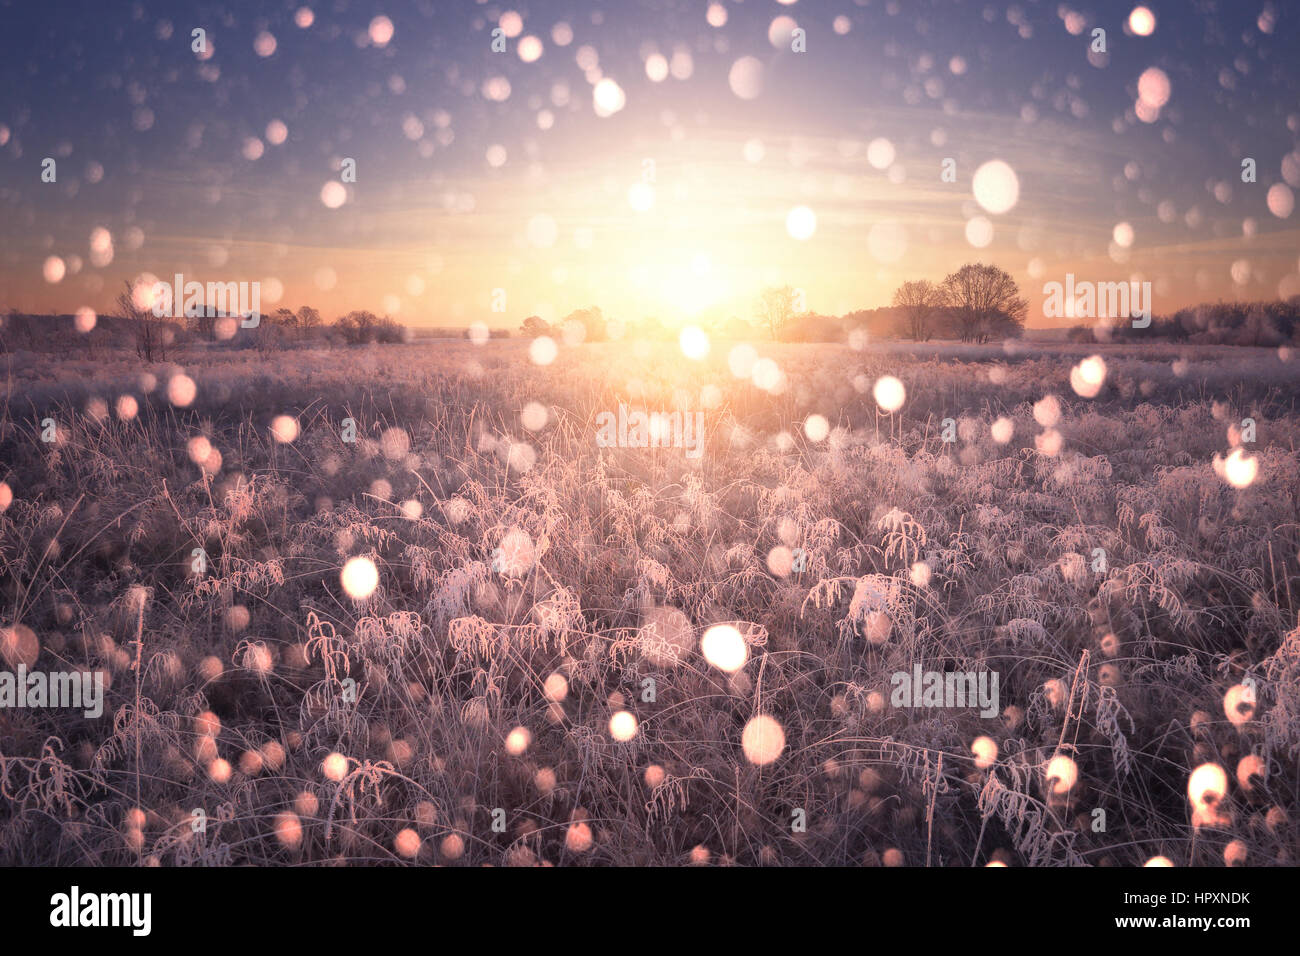 Christmas Background with snowflakes. Bright Xmas landscape. Winter sunrise with color snowflakes. Stock Photo